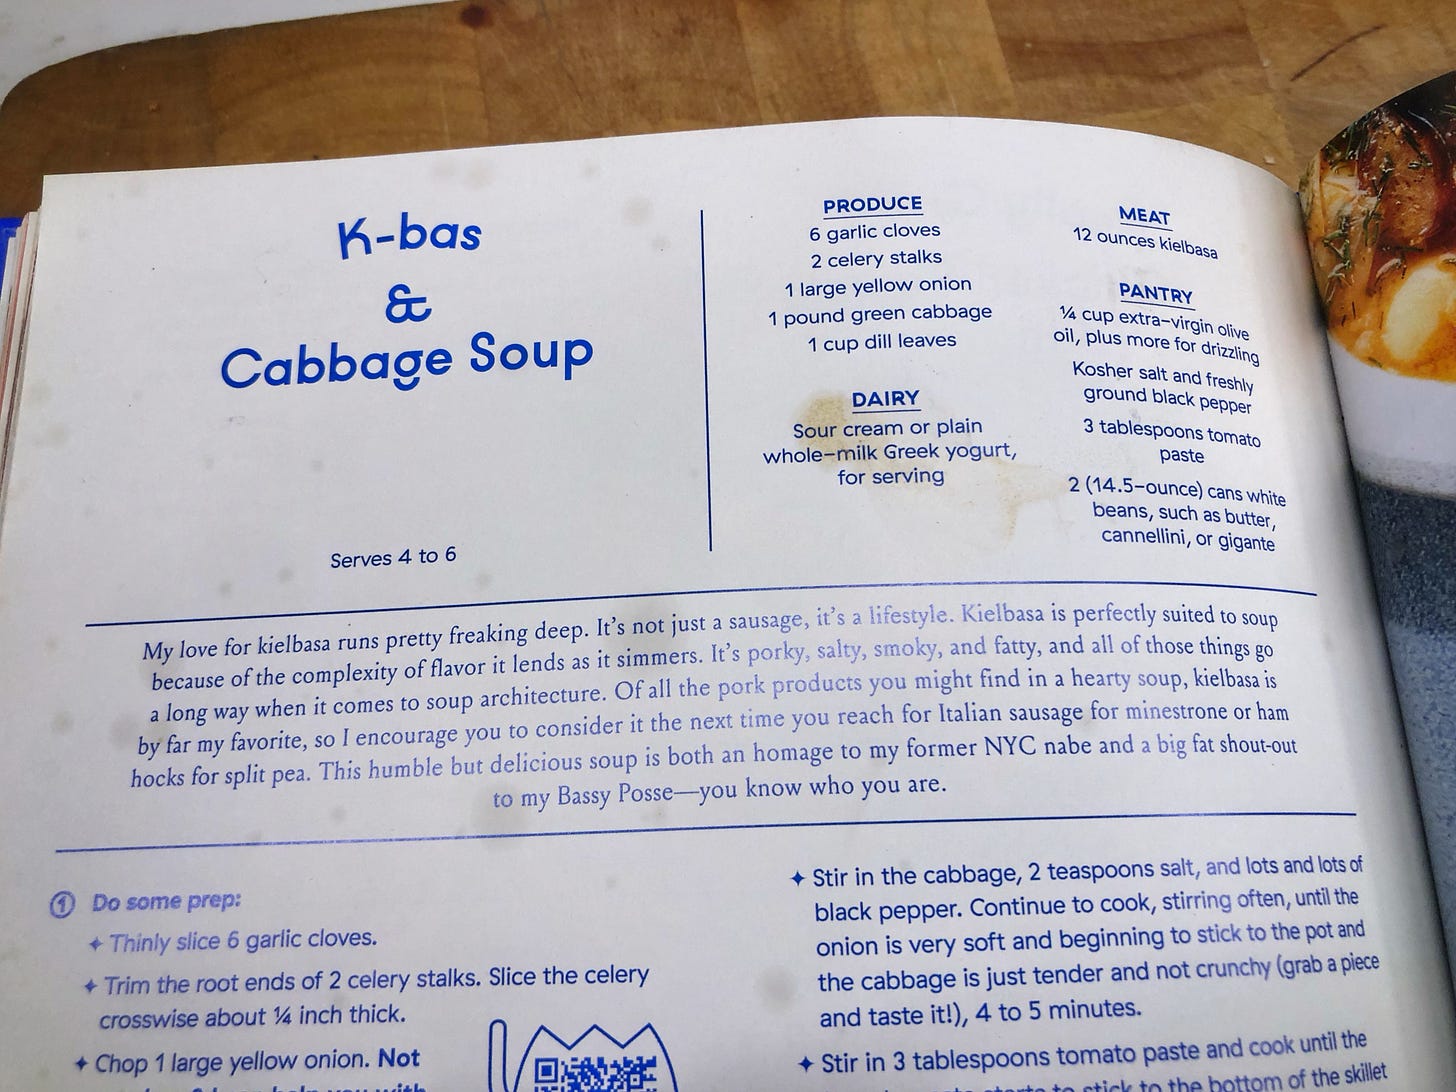 The recipe page for K-bas & Cabbage Soup in Molly Baz's "Cook This Book". It has many spatter and drip stains on it. 